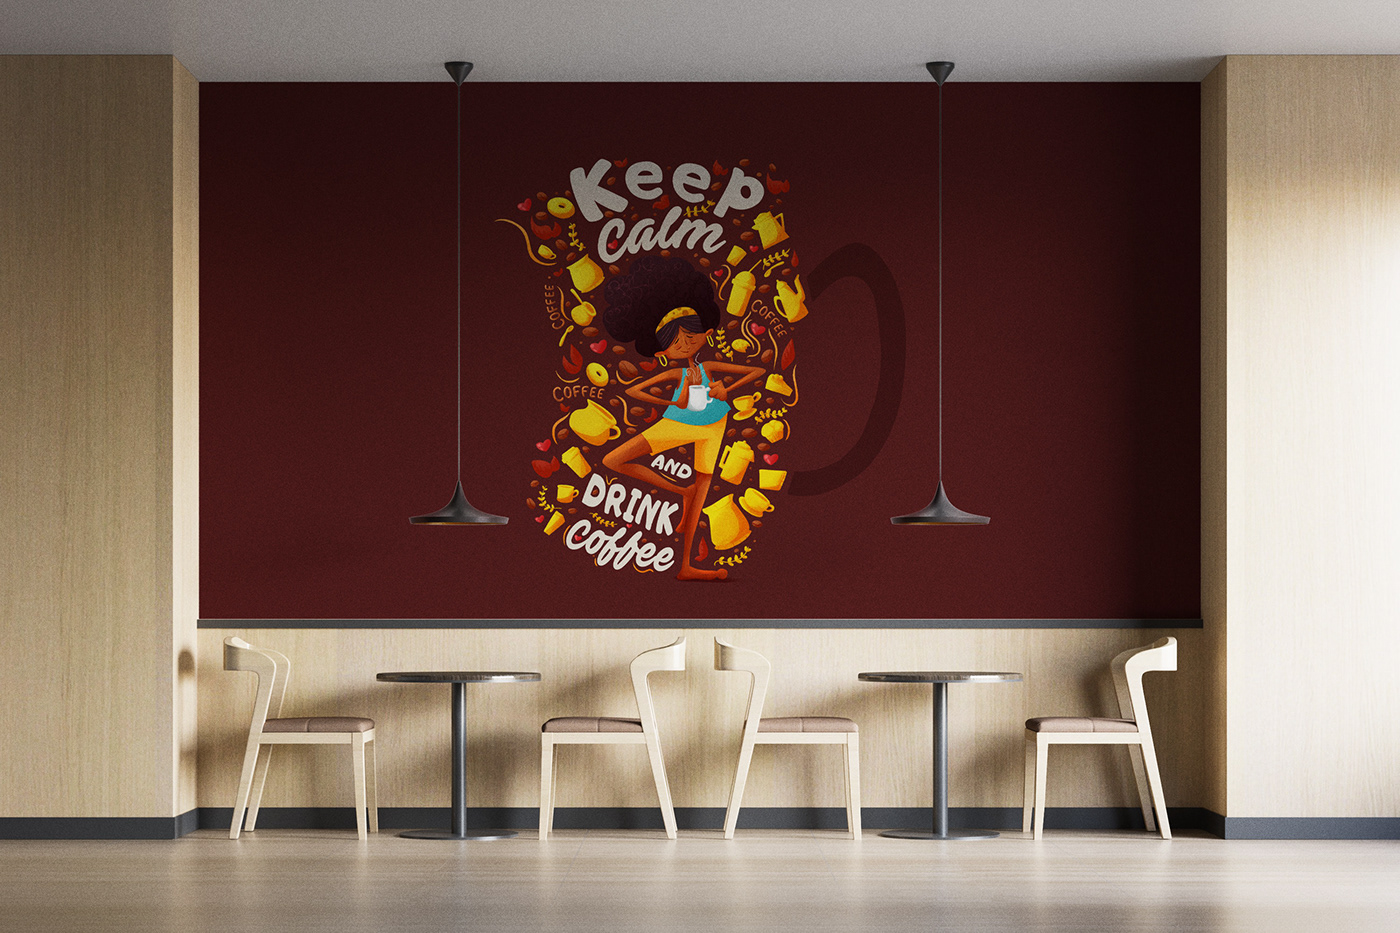 Advertising  cafe cafeteria characterdesign Coffee coffee shop ILLUSTRATION  personagem publicidade publicity